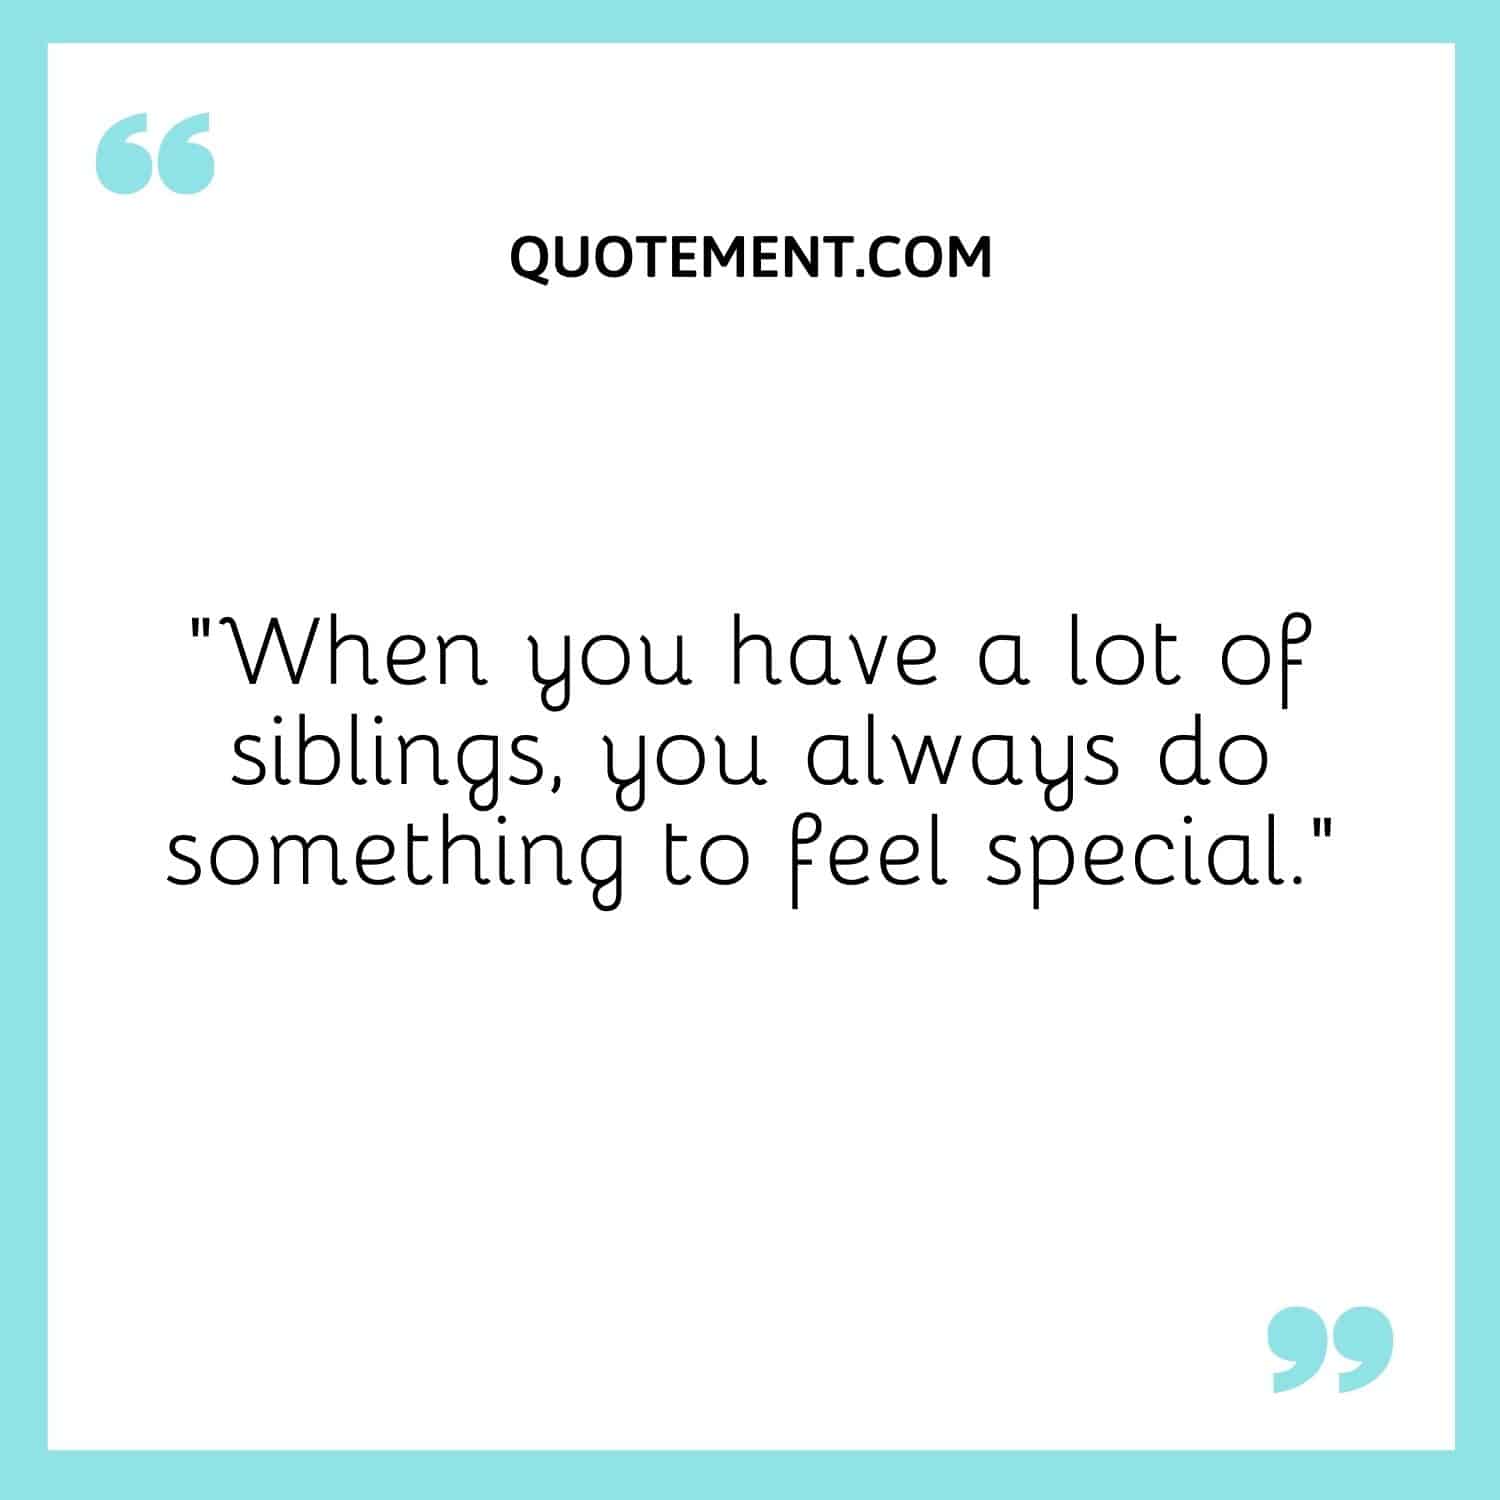 When you have a lot of siblings, you always do something to feel special.